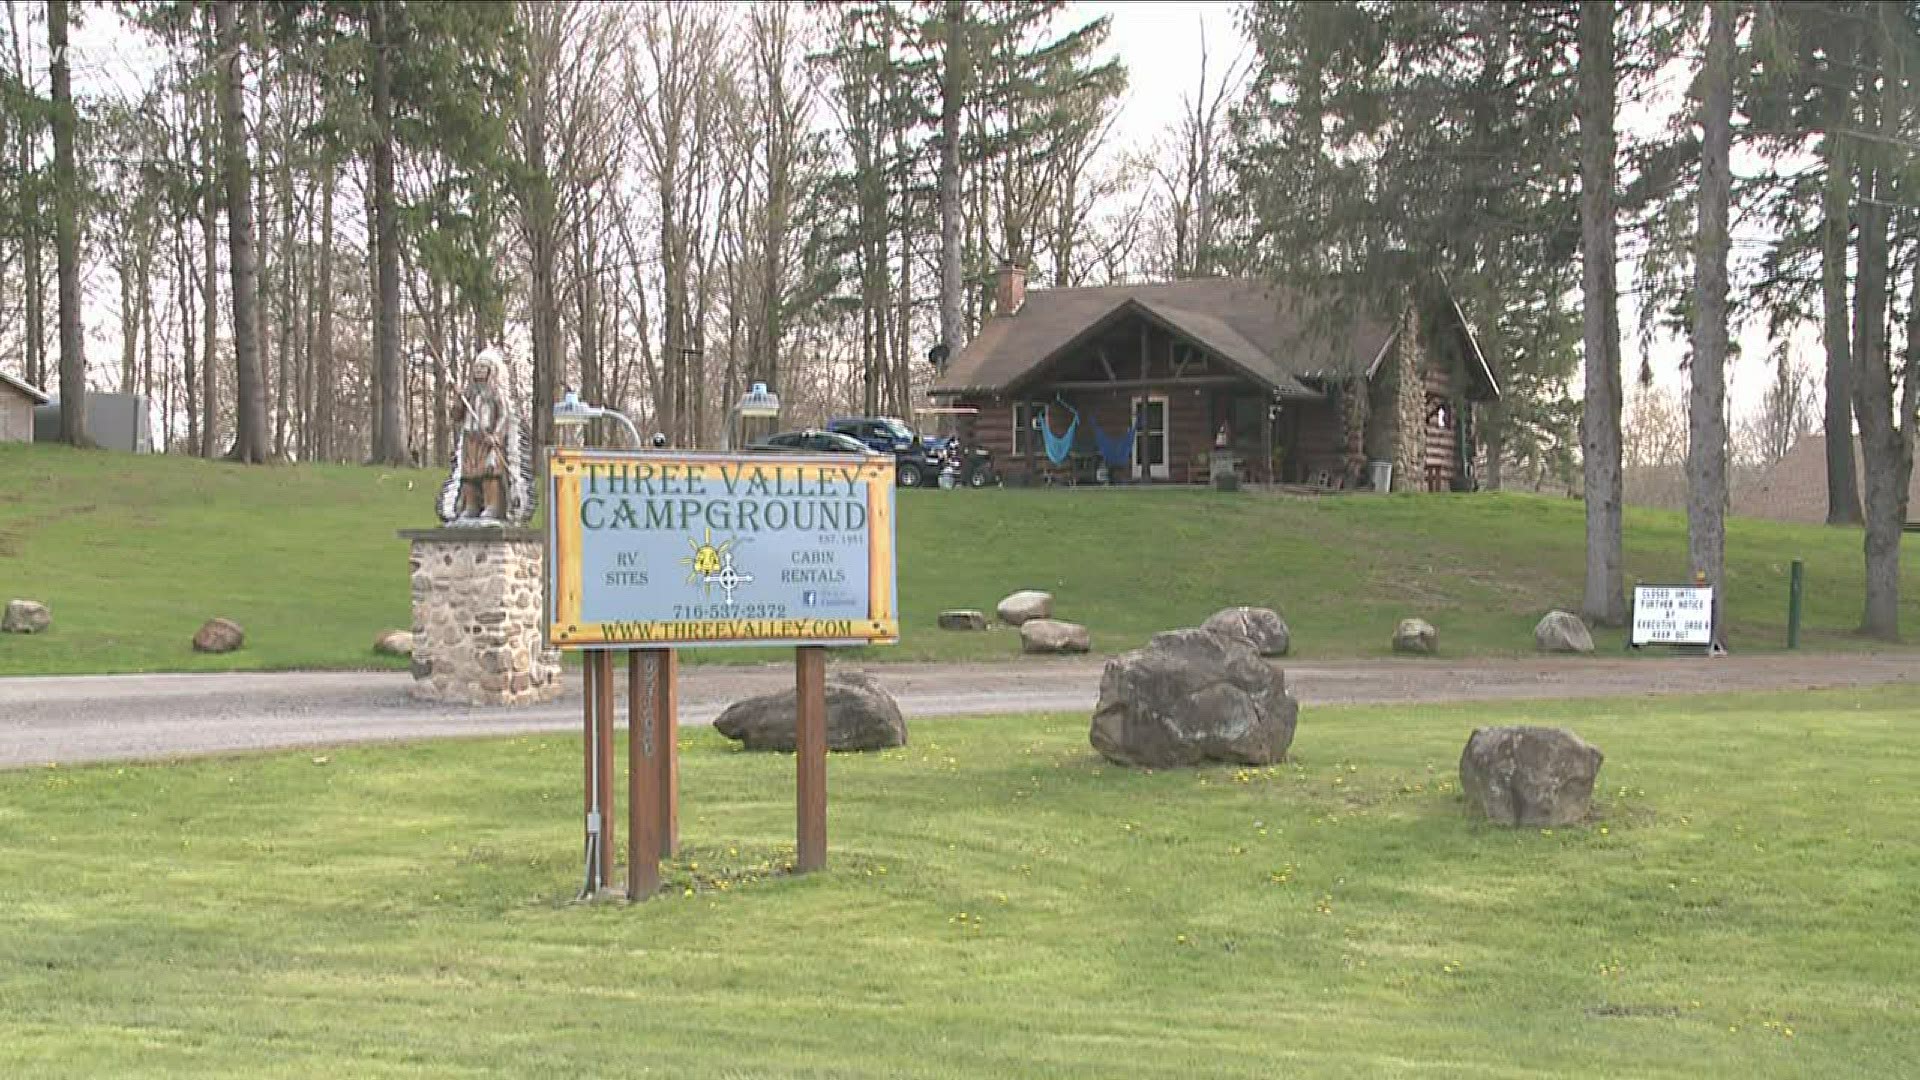 Erie County campgrounds can now reopen